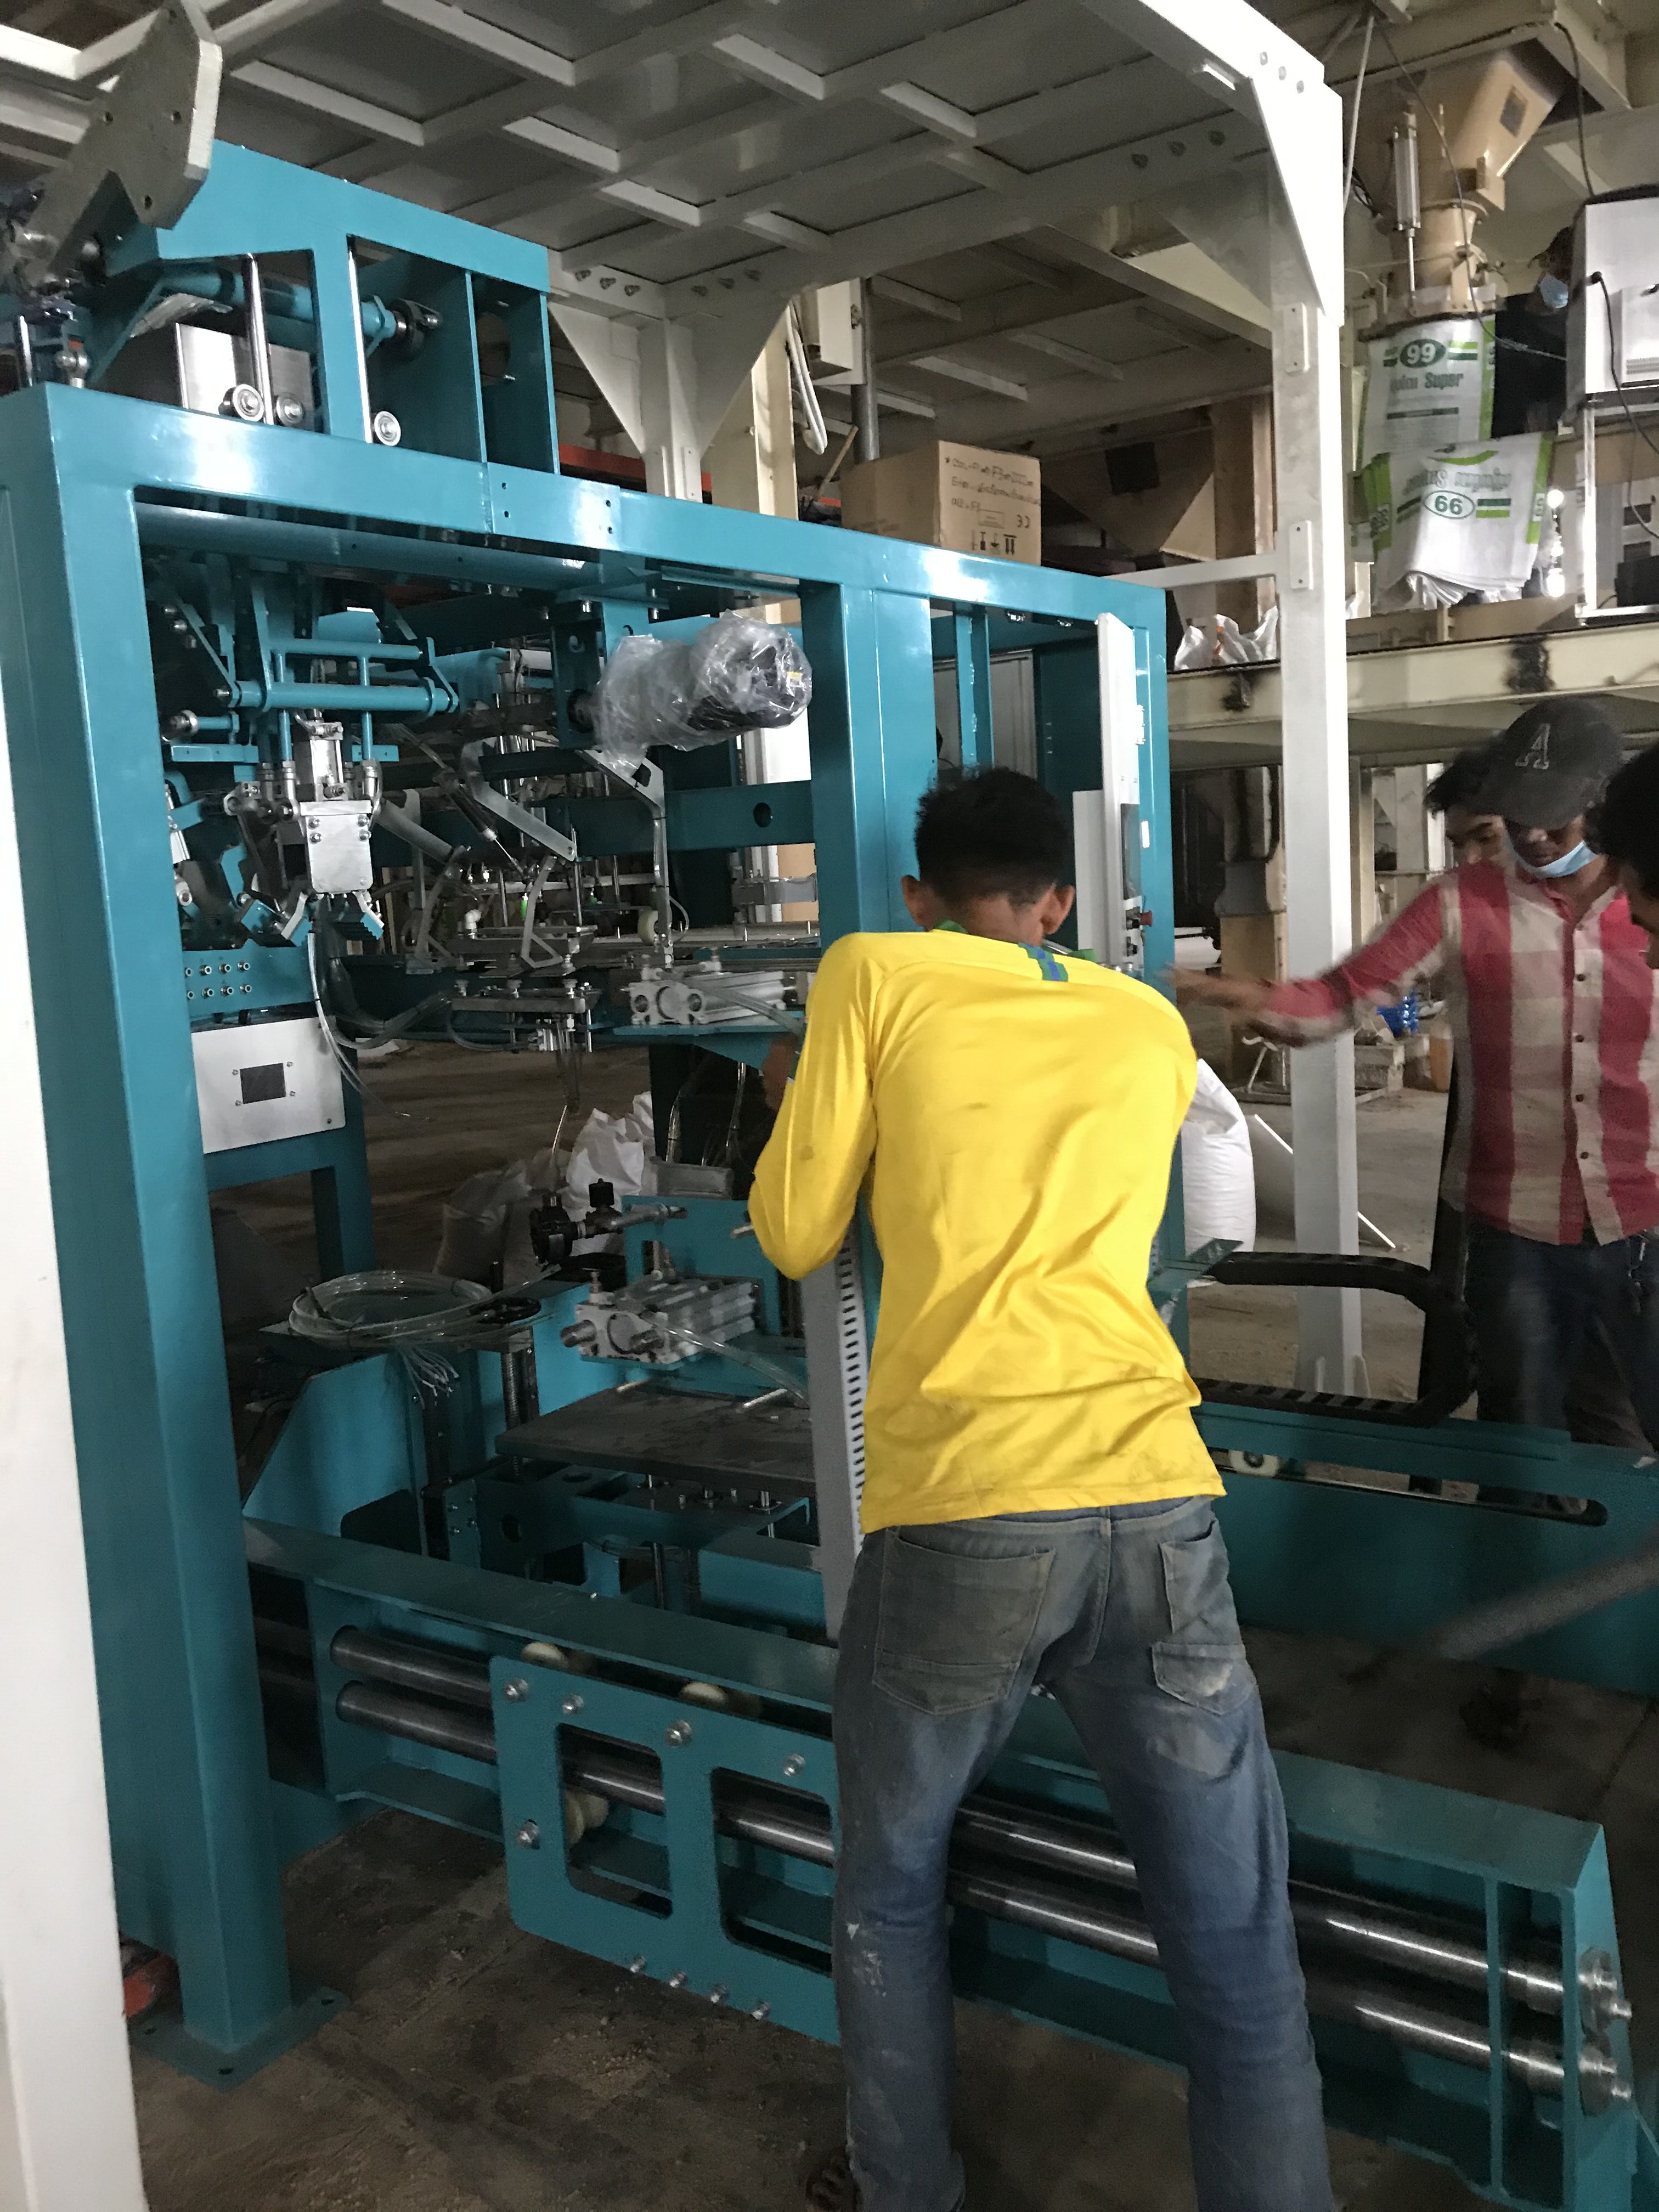 Fully Automatic Valve-Bag Packing Machine Robot palletizing machine in Wuxi, China Powder Milk Packing Machine packing and palletising line for potassium sulfate 25kg bags AUTOMATED PALLETIZING LINE r